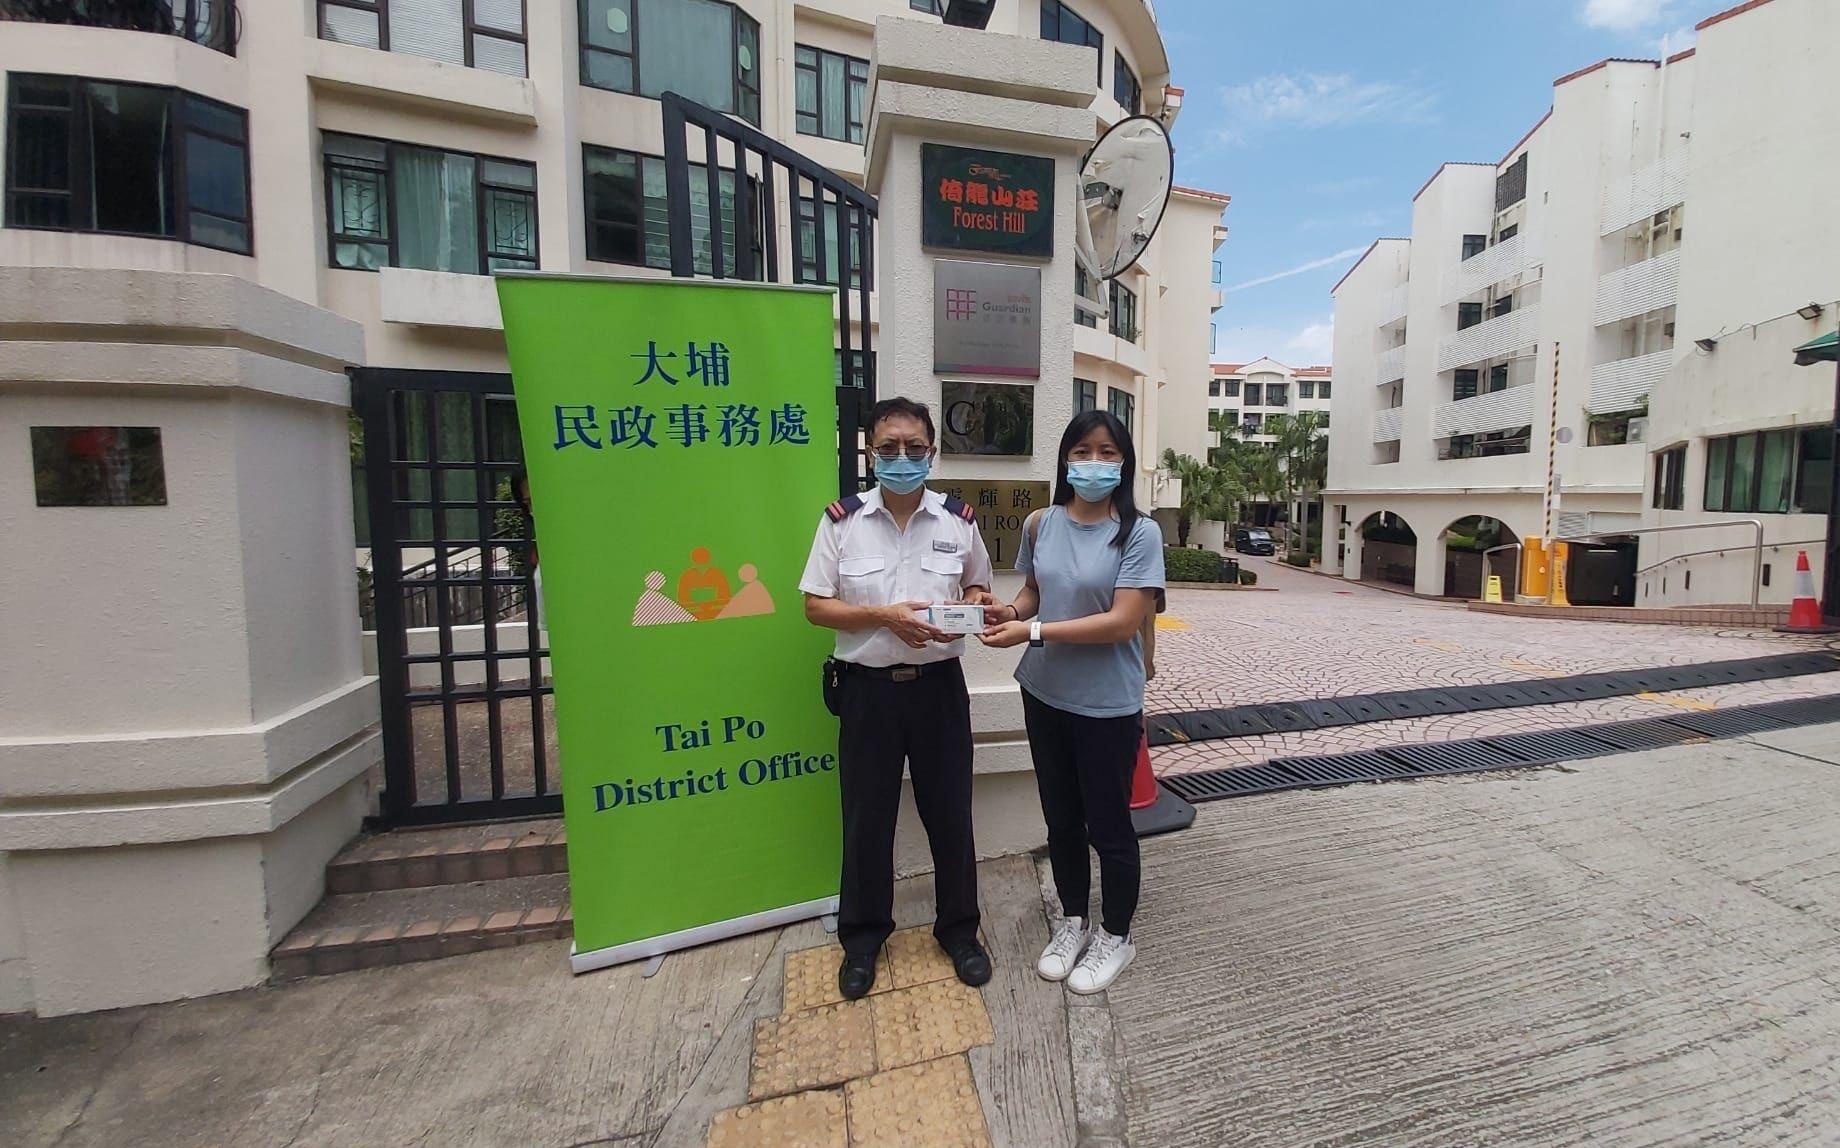 The Tai Po District Office today (June 2) distributed COVID-19 rapid test kits to households, cleansing workers and property management staff living and working in Forest Hill for voluntary testing through the property management company.